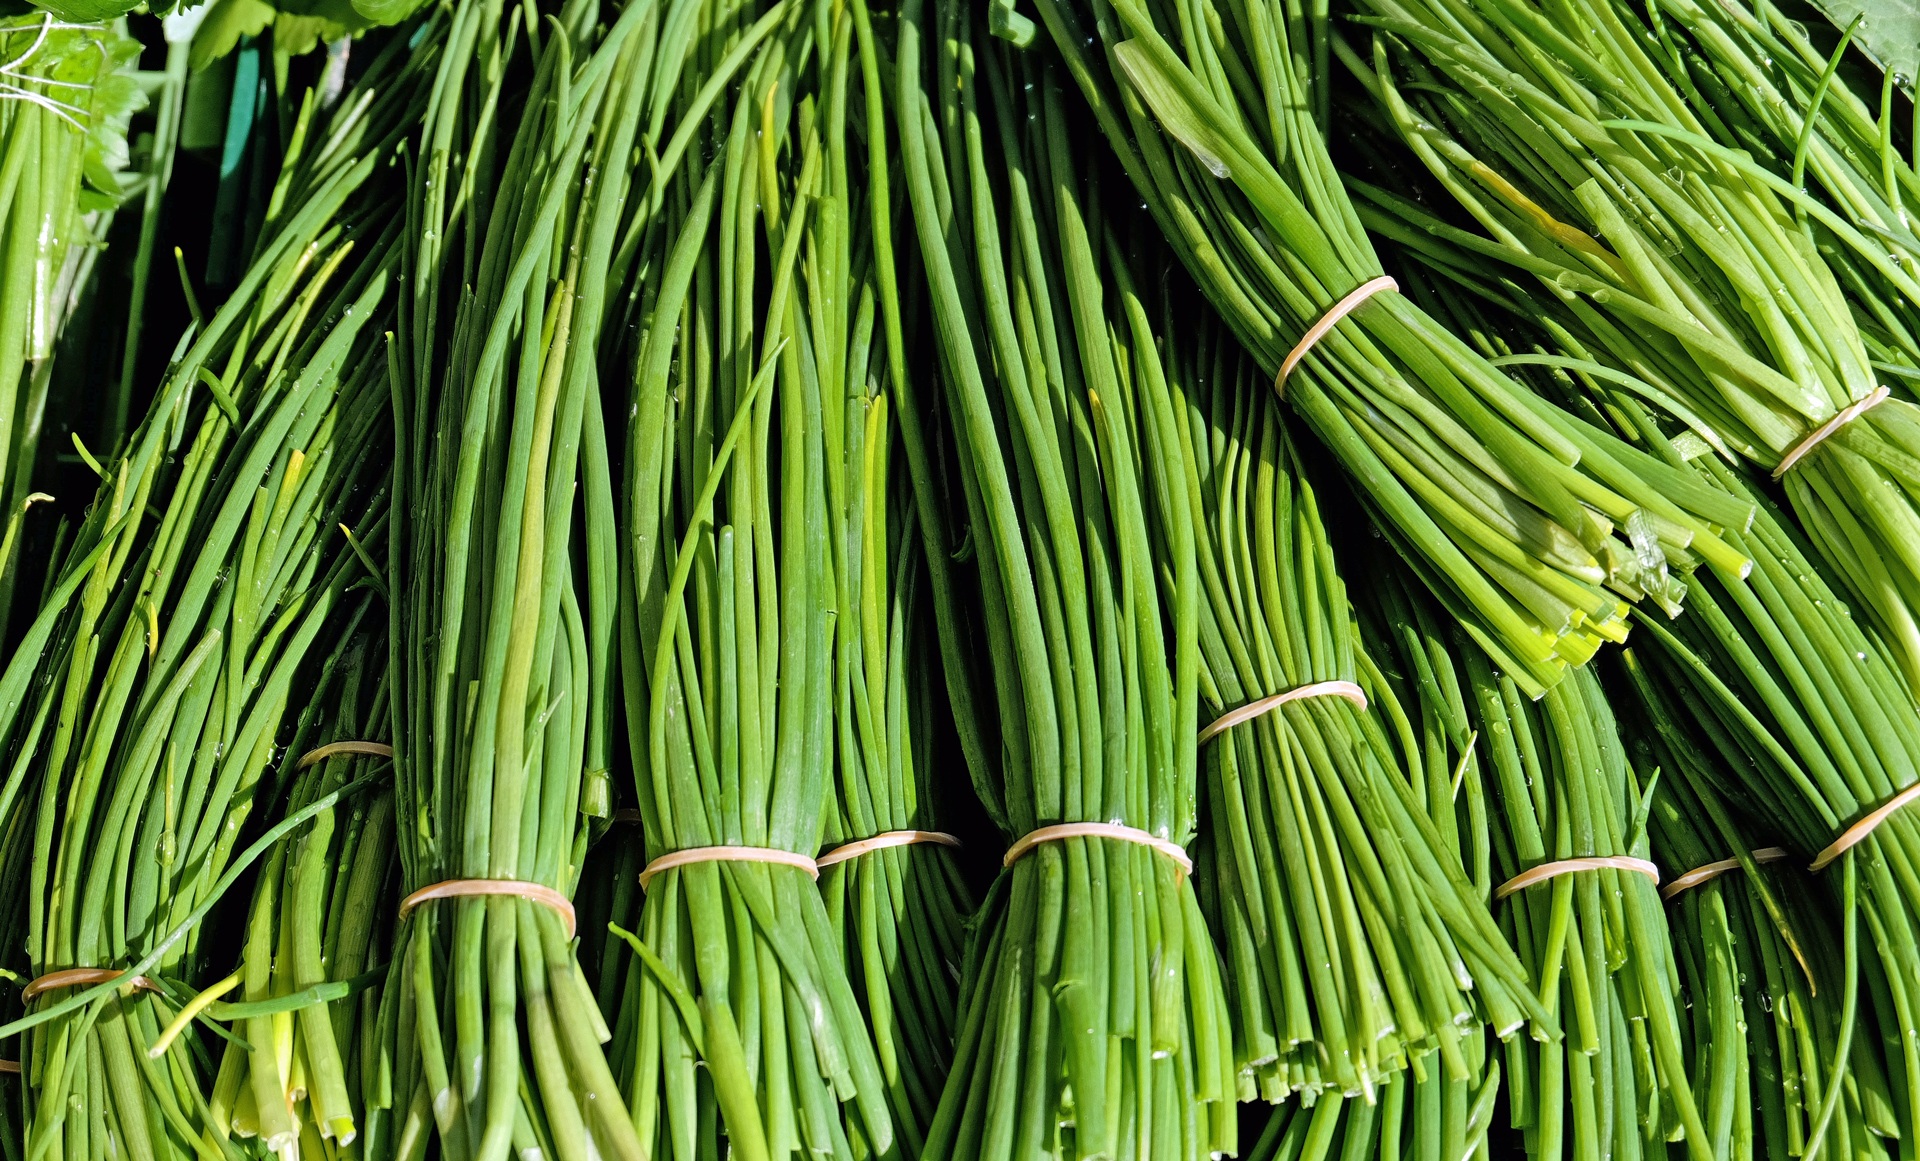 Weight Equivalents: Chives